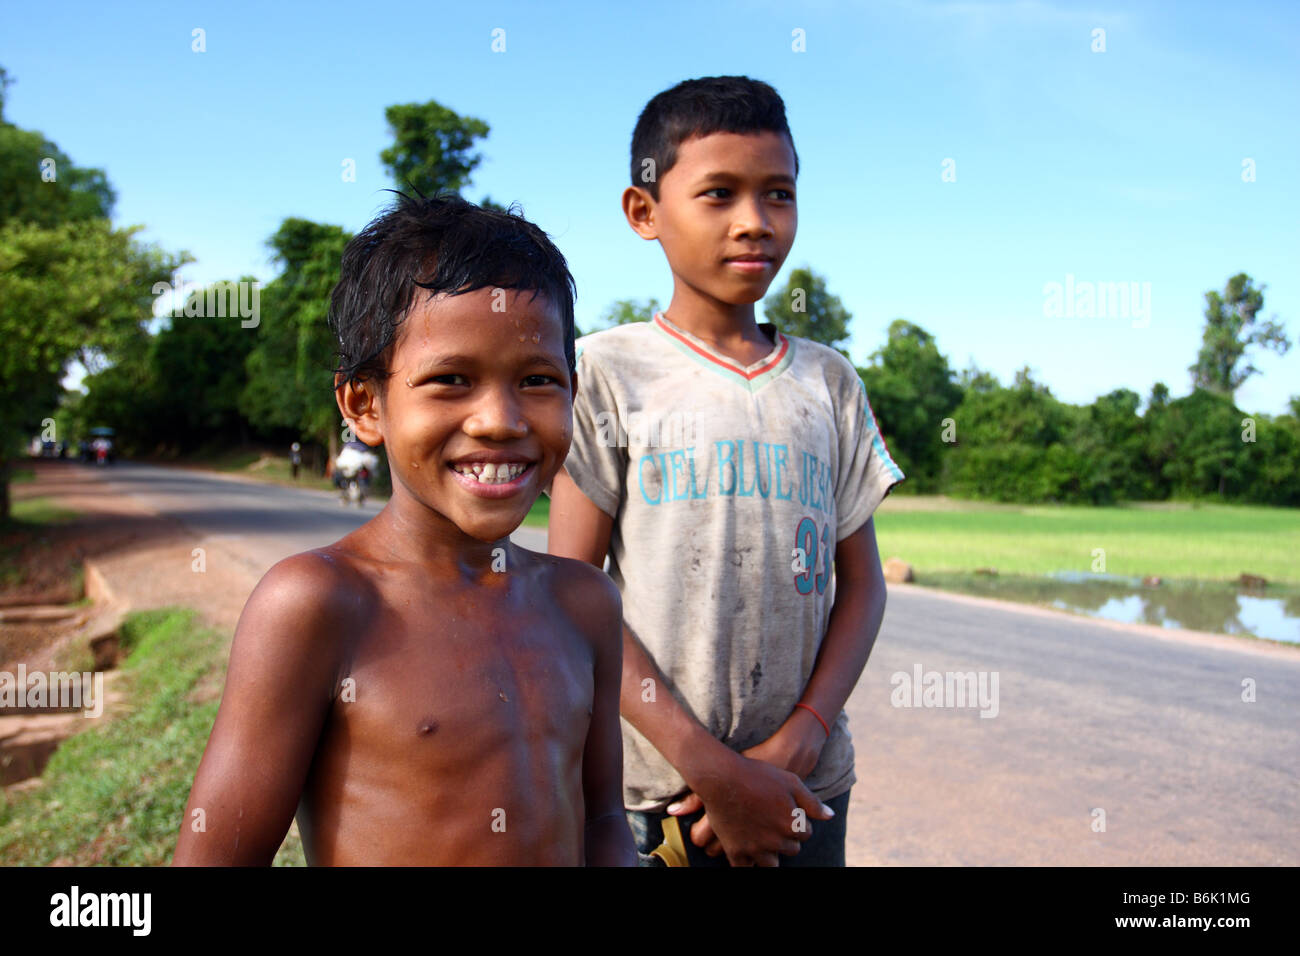 Portrait of a local Cambodian kid with an happy face in the streets arond Angkor Wat, Siem Reap Cambodia Stock Photo